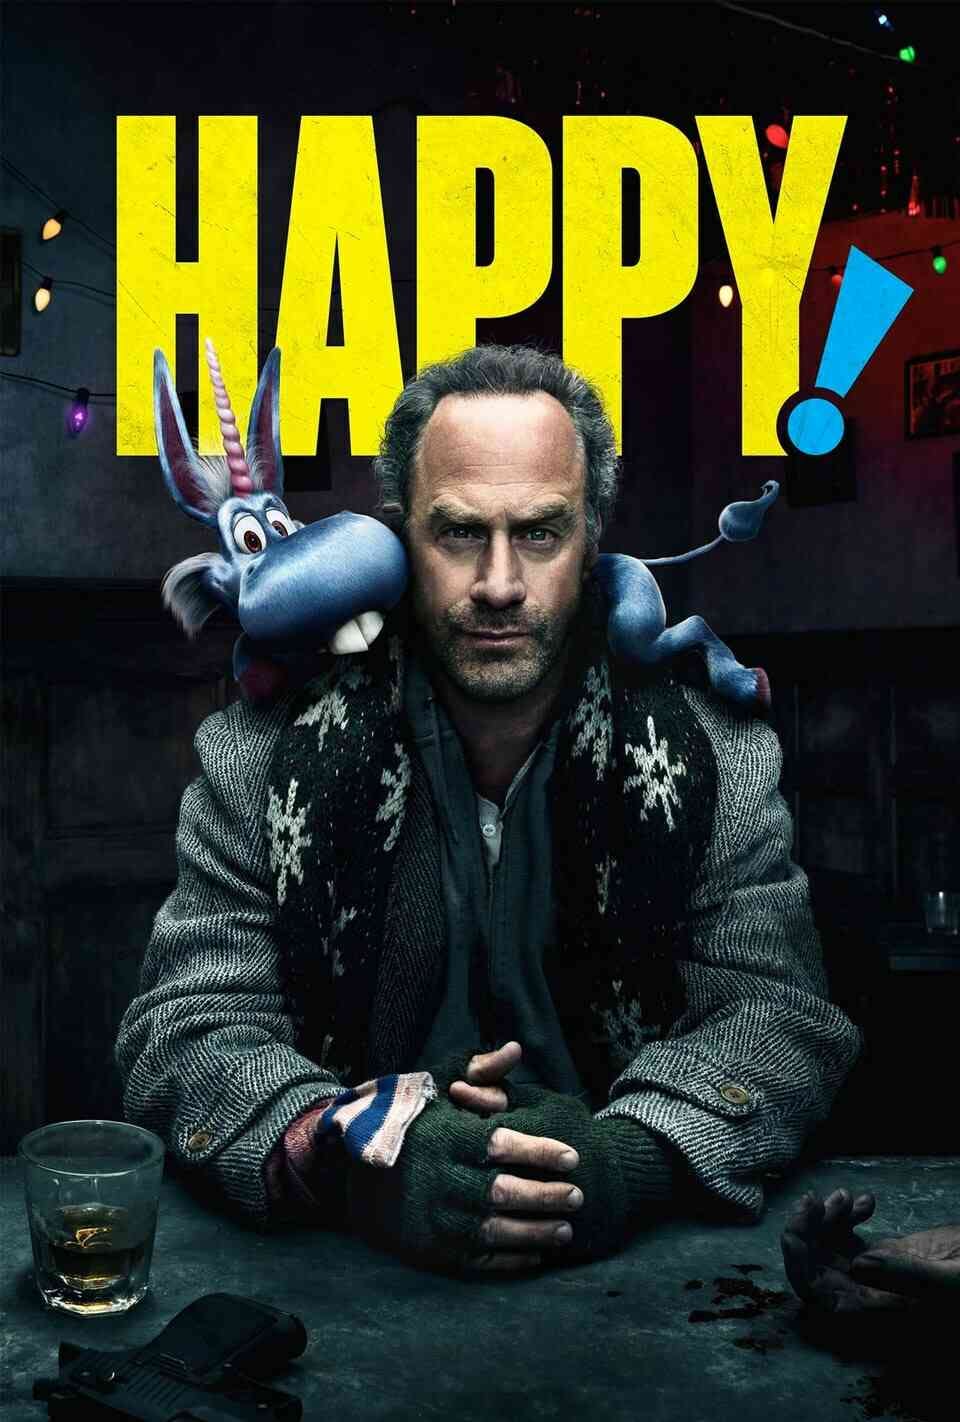 Read Happy! screenplay (poster)